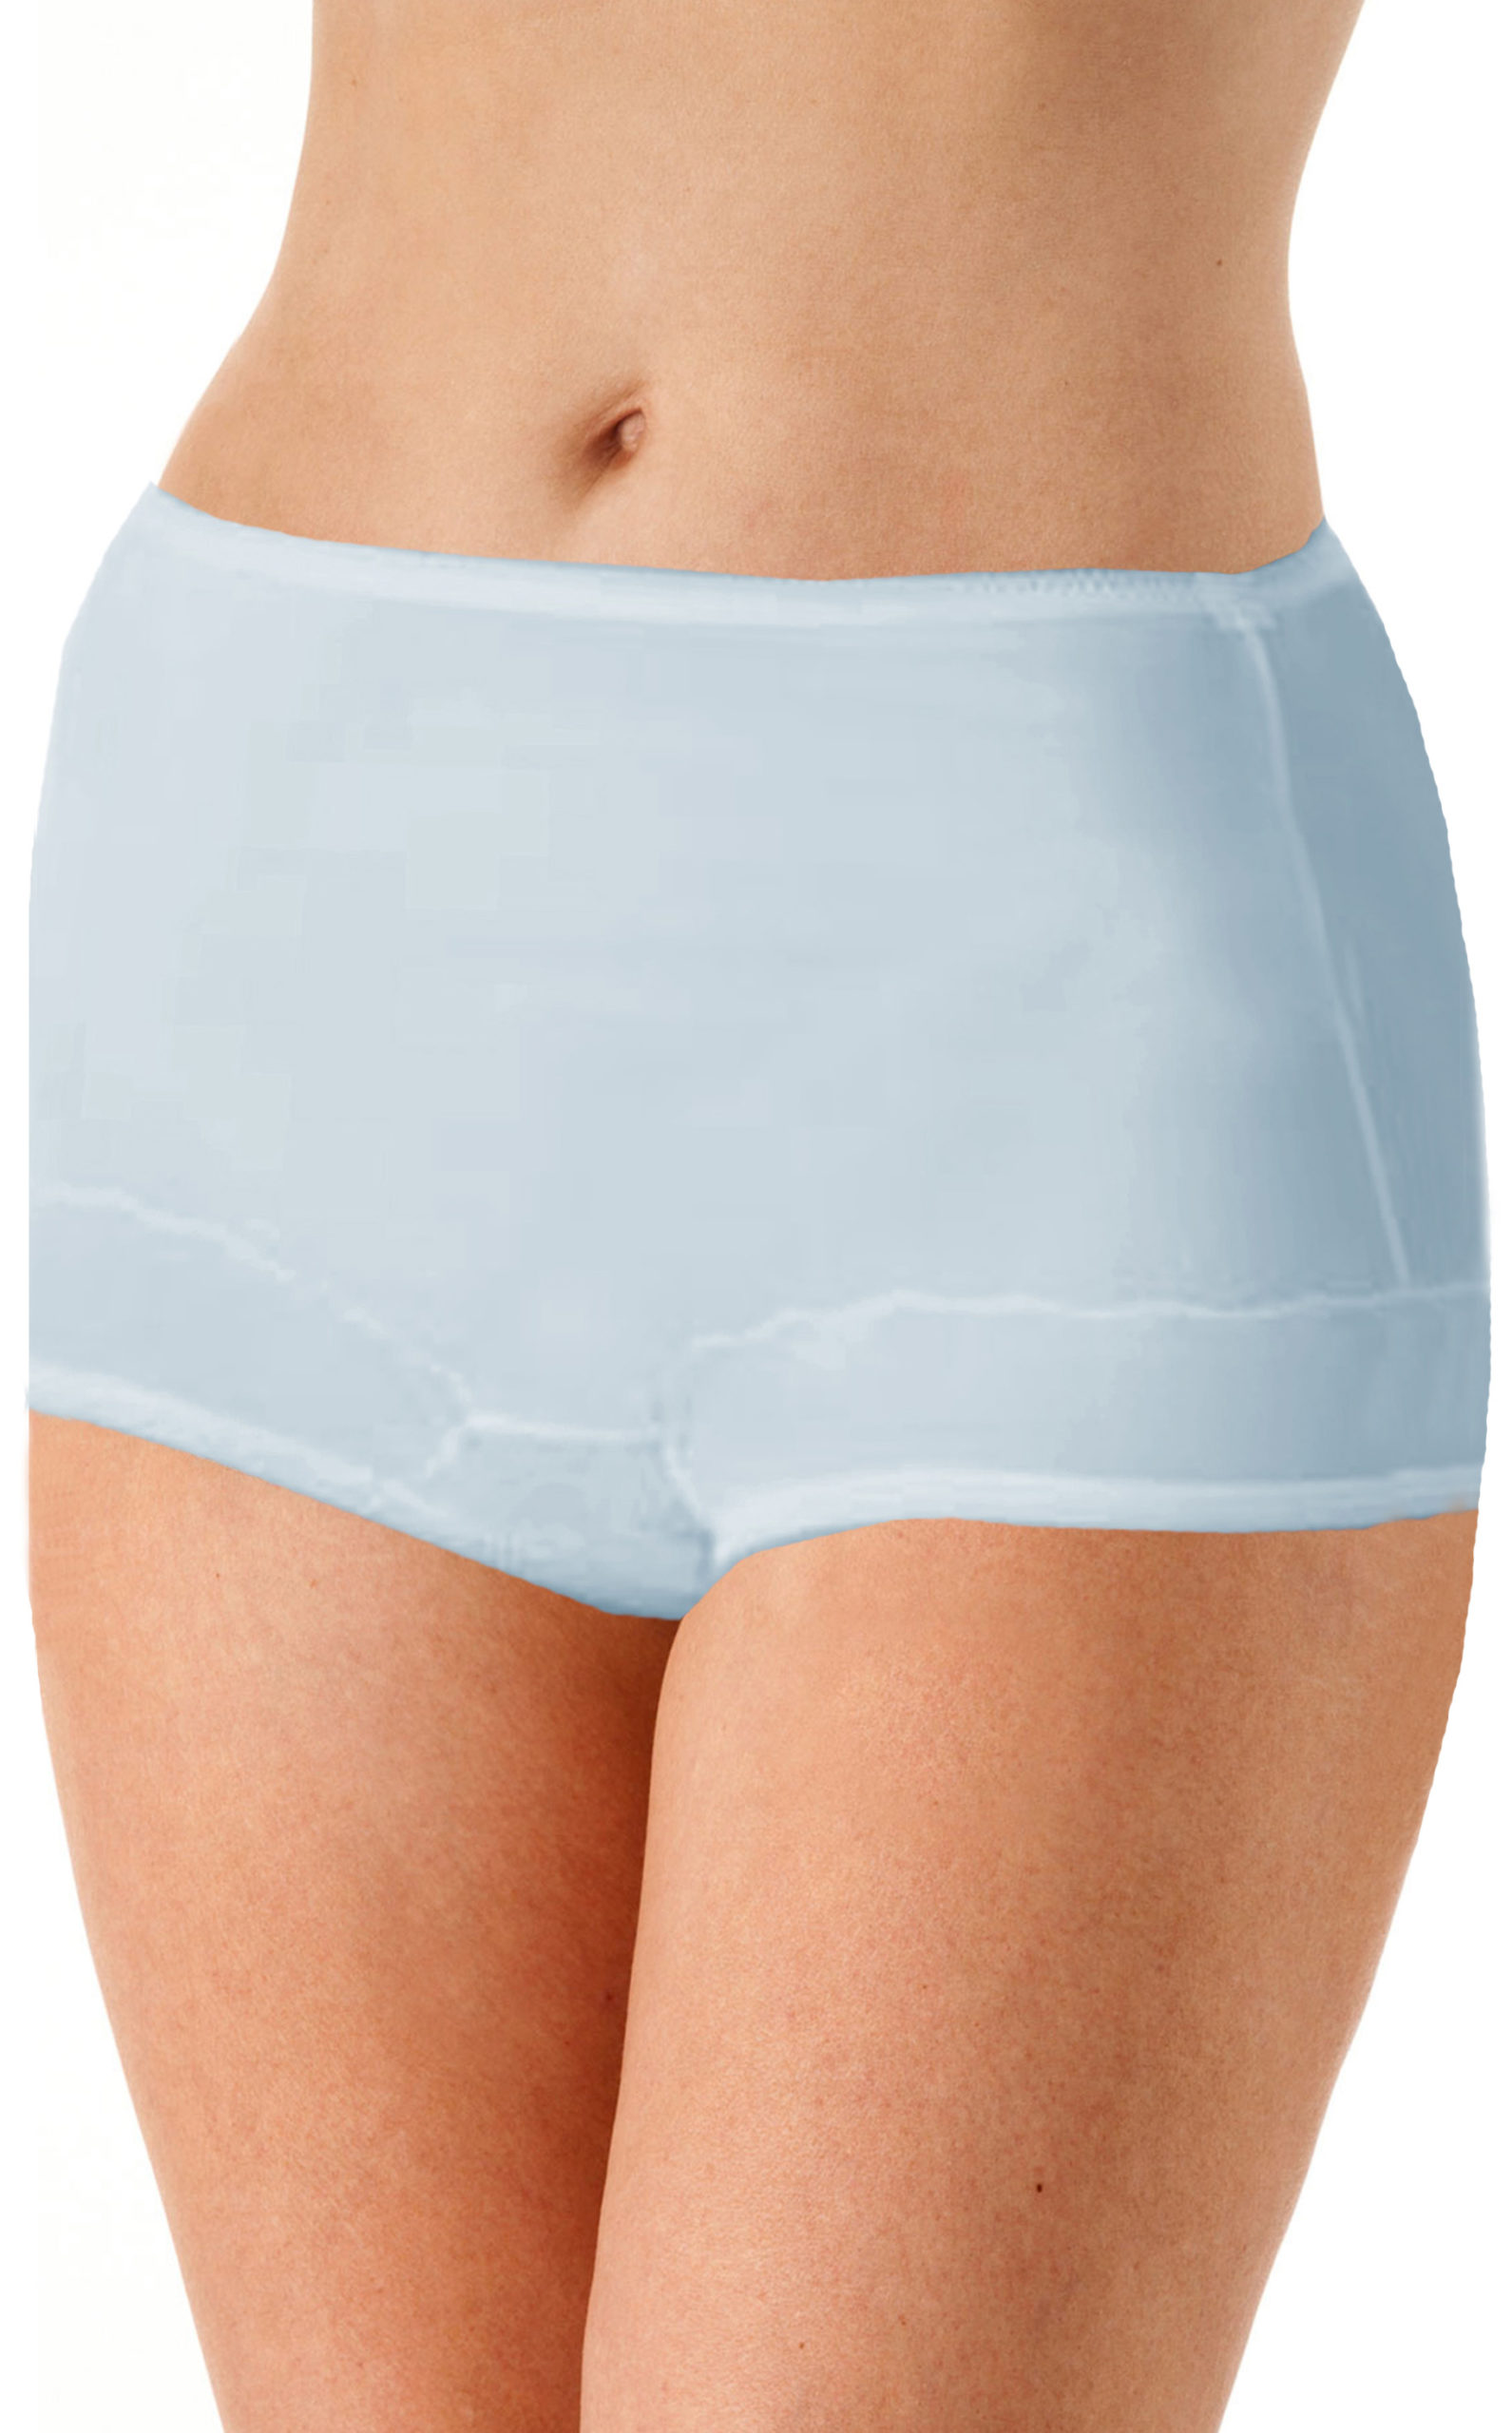 Cloee Cotton Panties for Women Soft Lace Waistband 3 Pack